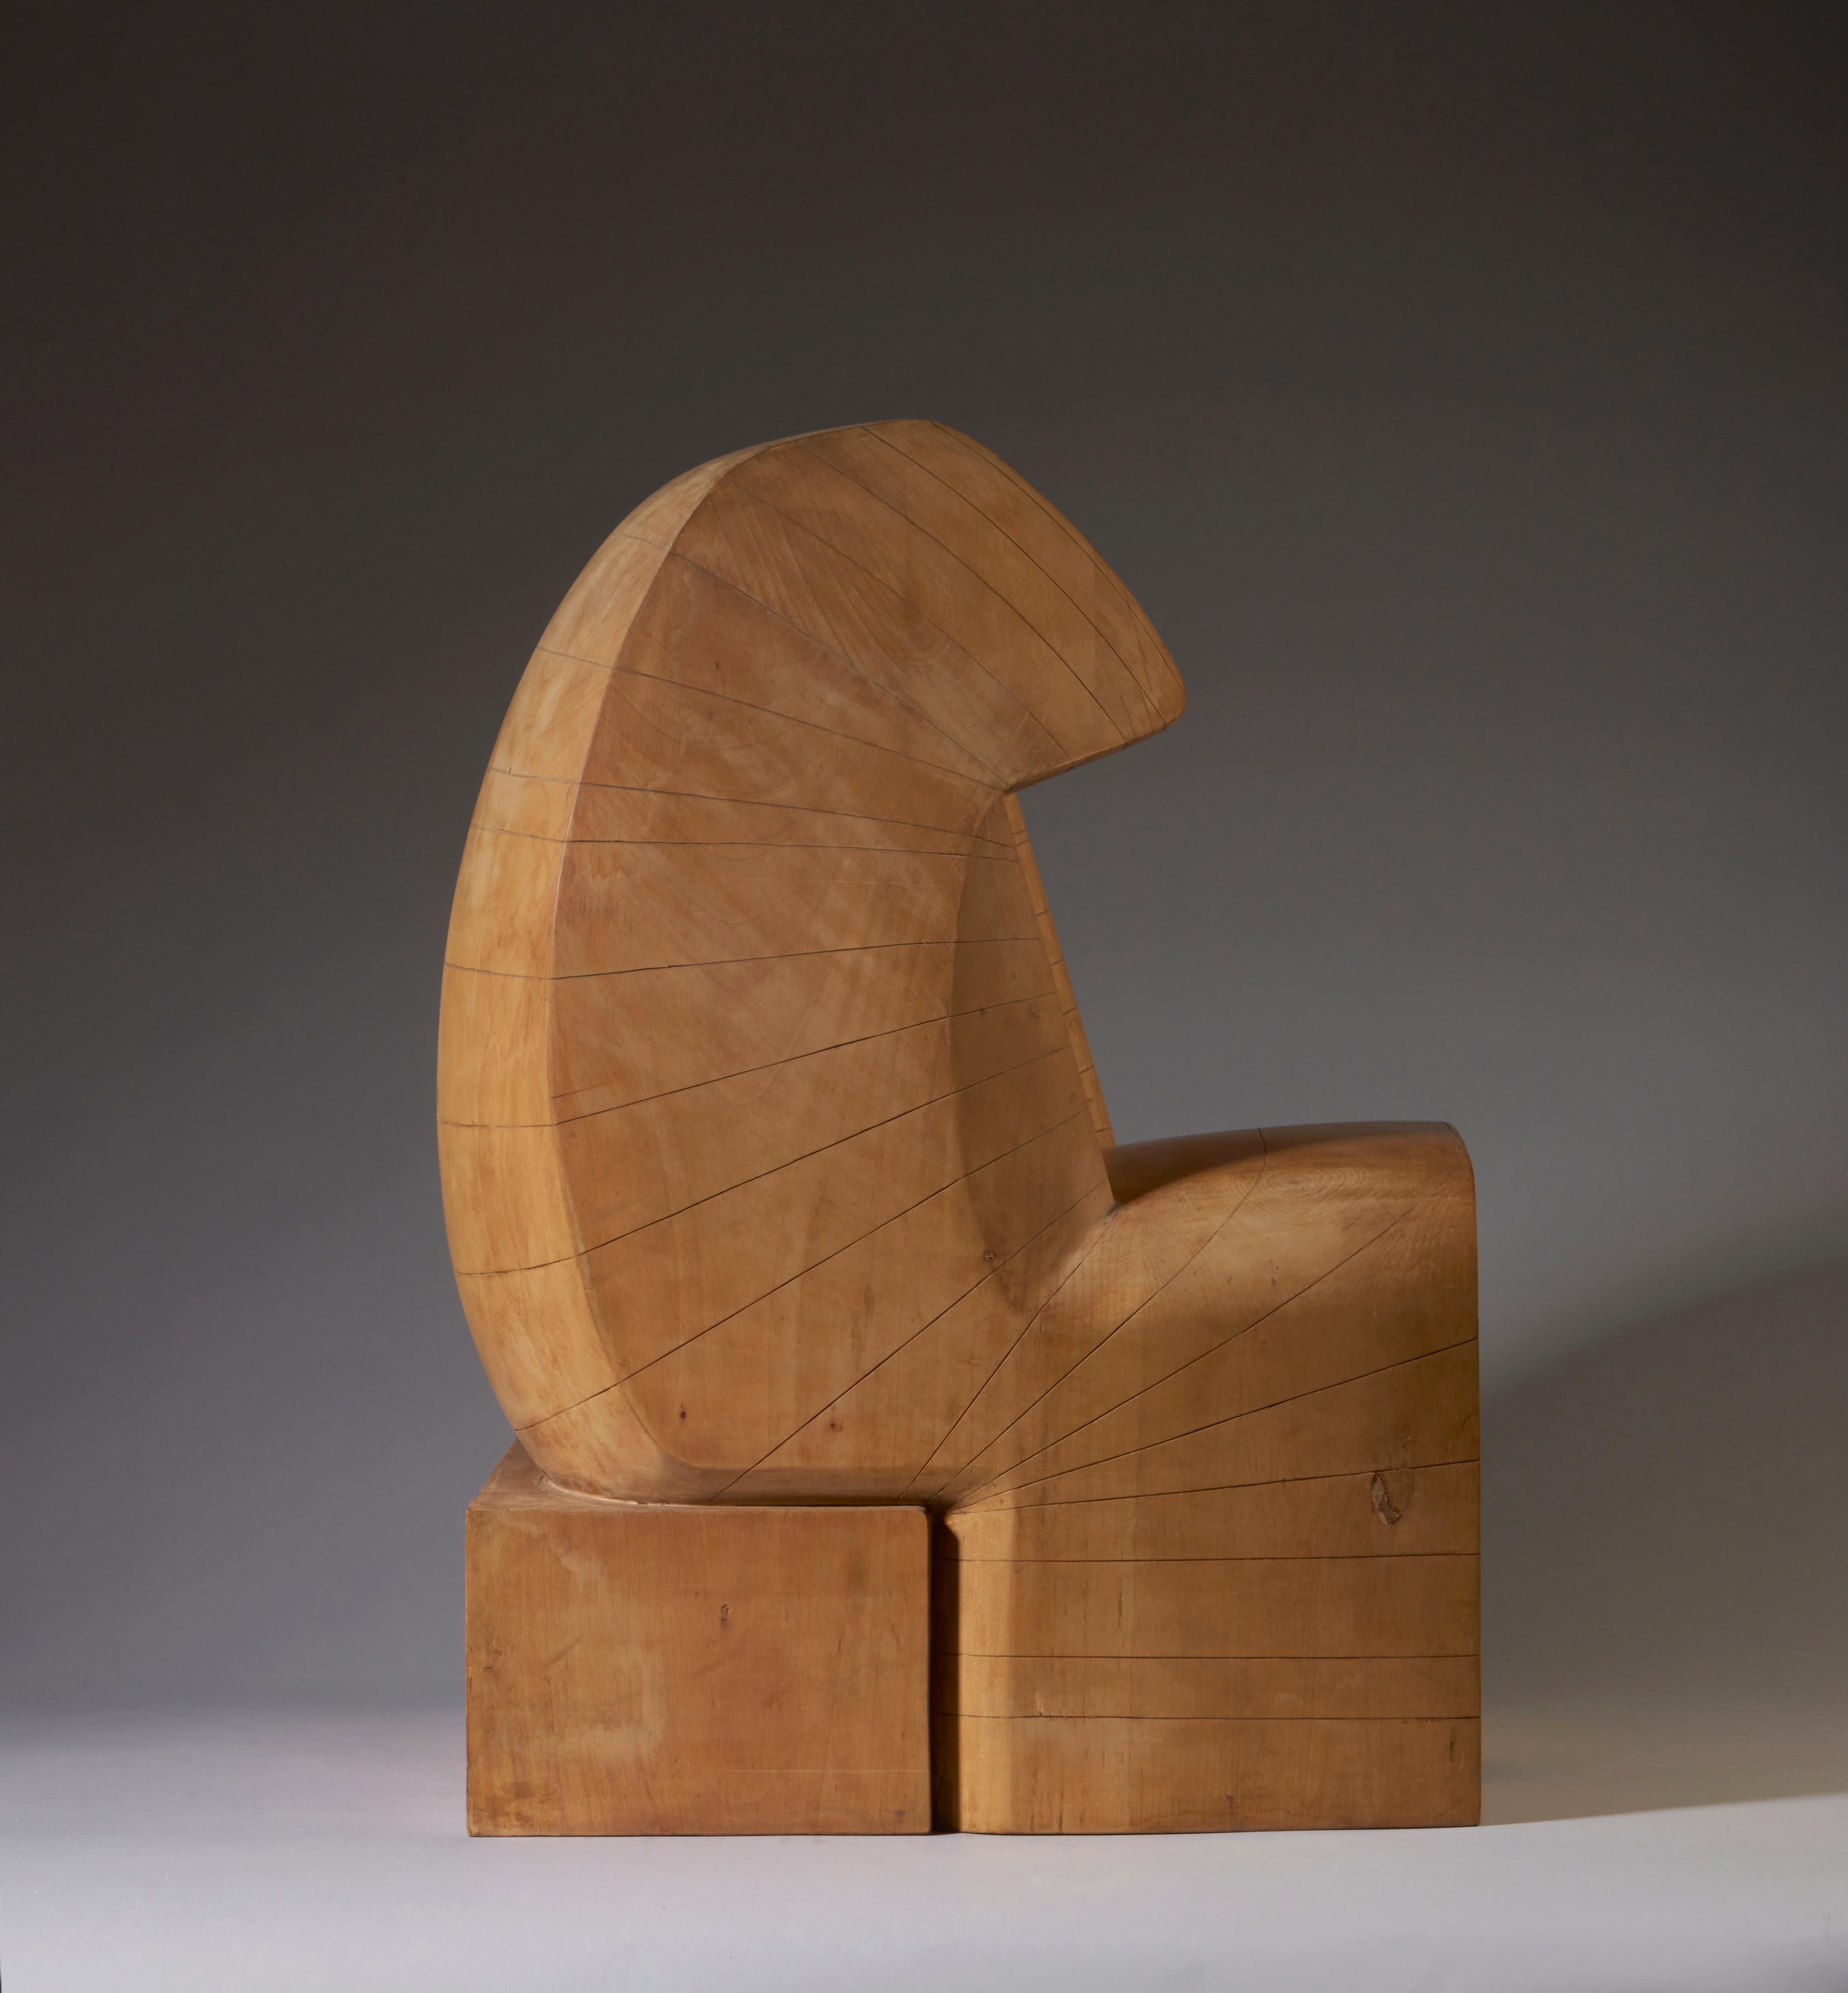 Giuseppe Rivadossi (Nave, July 8, 1935)  Shed, 1974 Wood sculpture For Sale 2